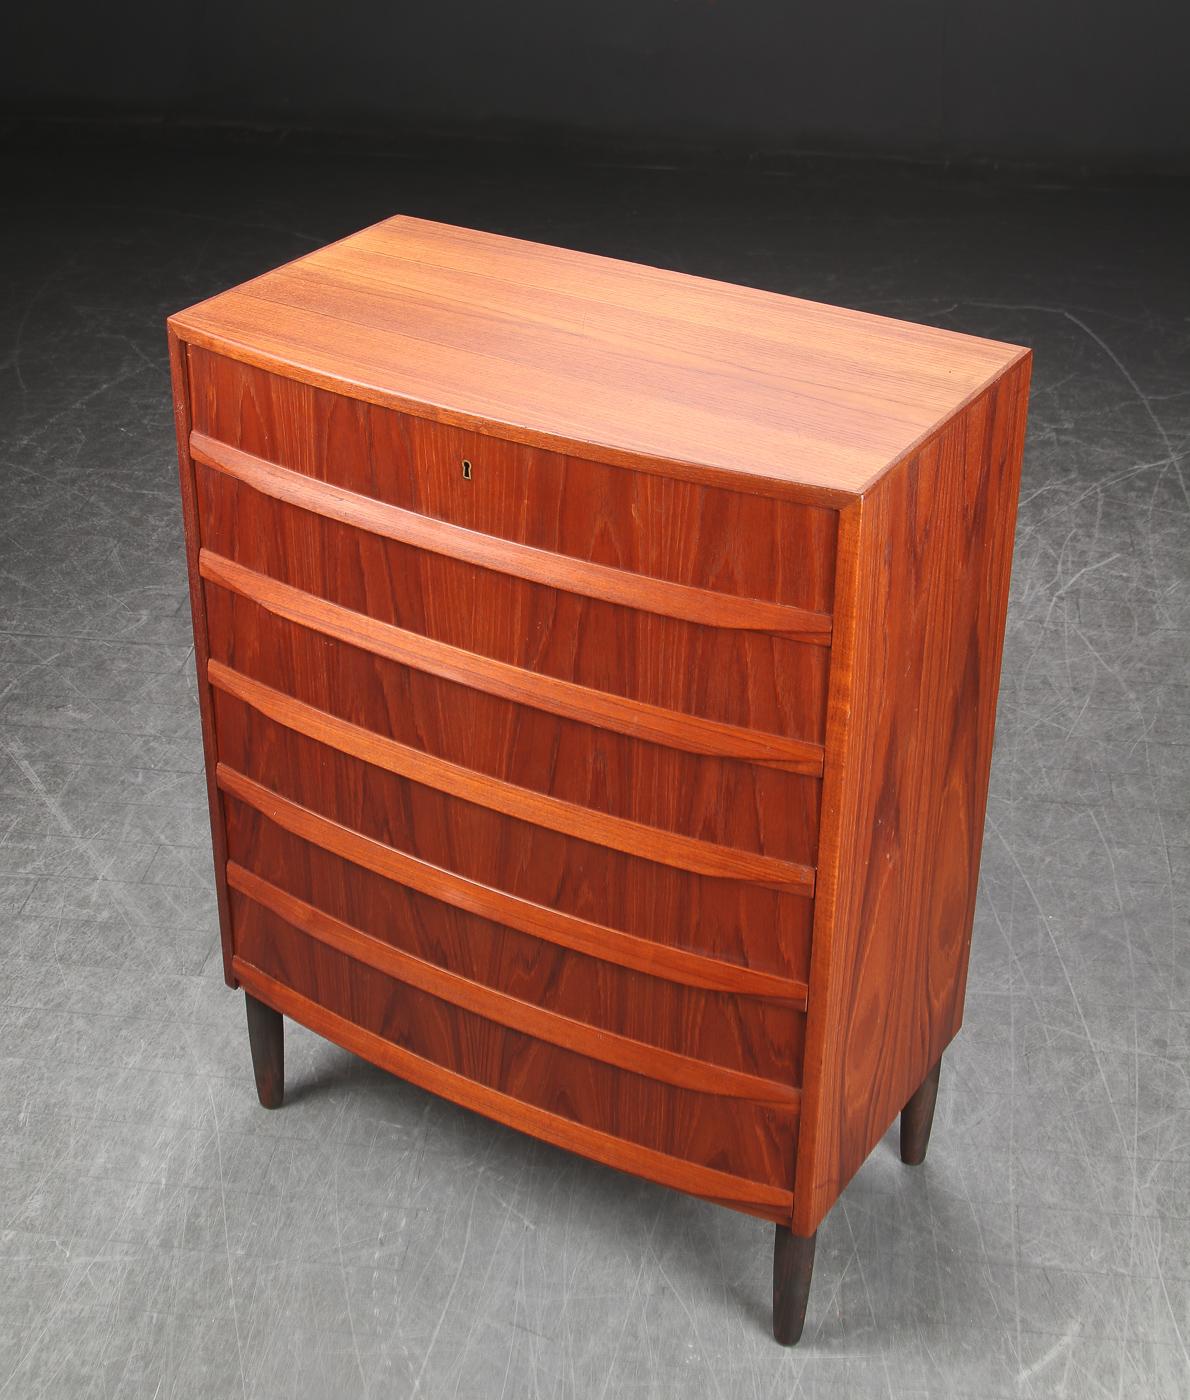 Chest of drawers made of teak wood comes from Denmark from 1960s.
Very good condition, under the process of renovation.